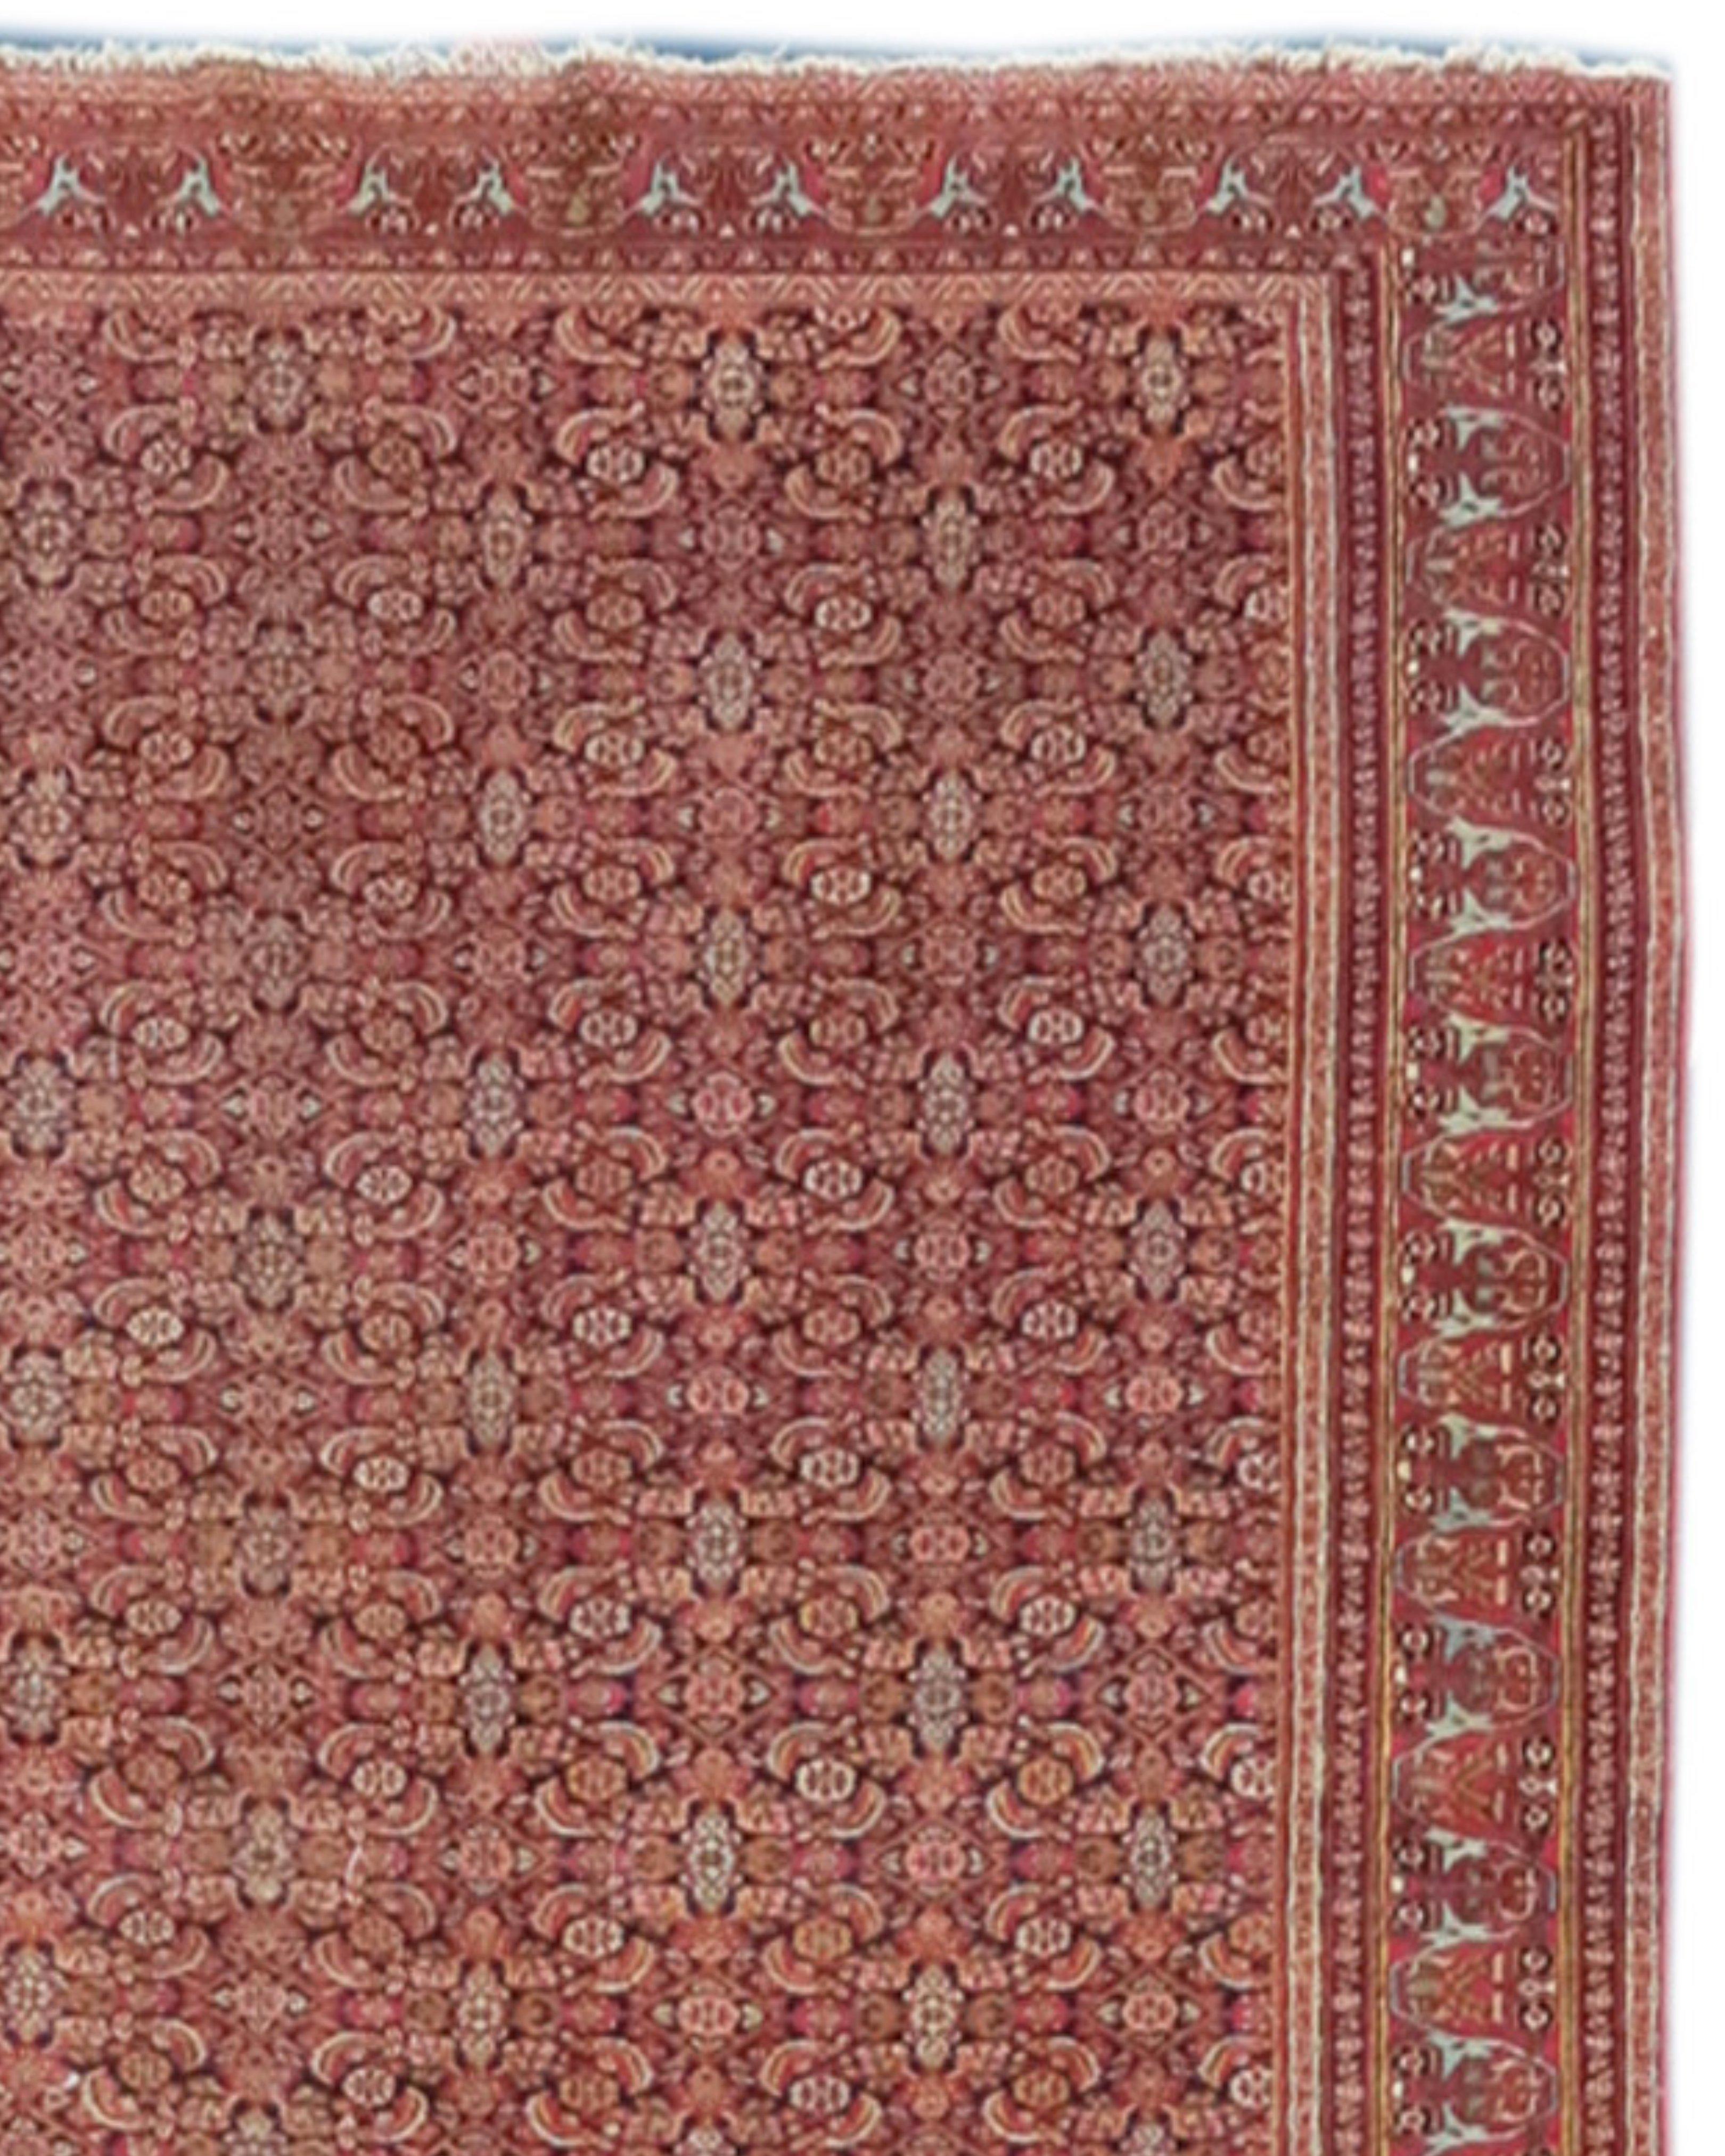 Khorassan Gallery Carpet, Late 19th century

Additional Information:
Dimensions: 7'0